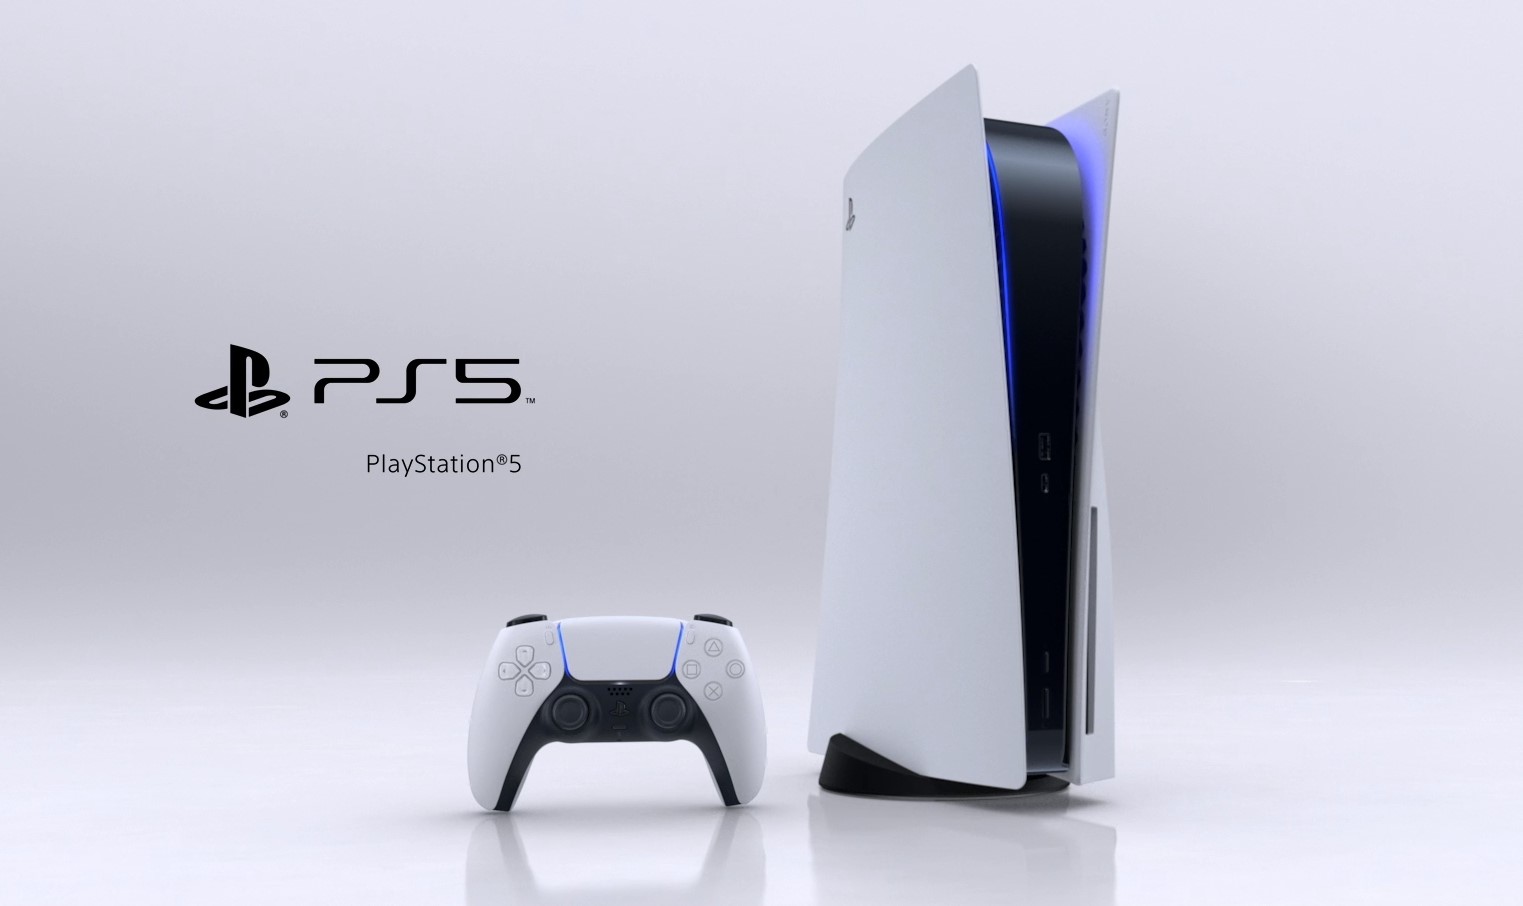 PS5 Image